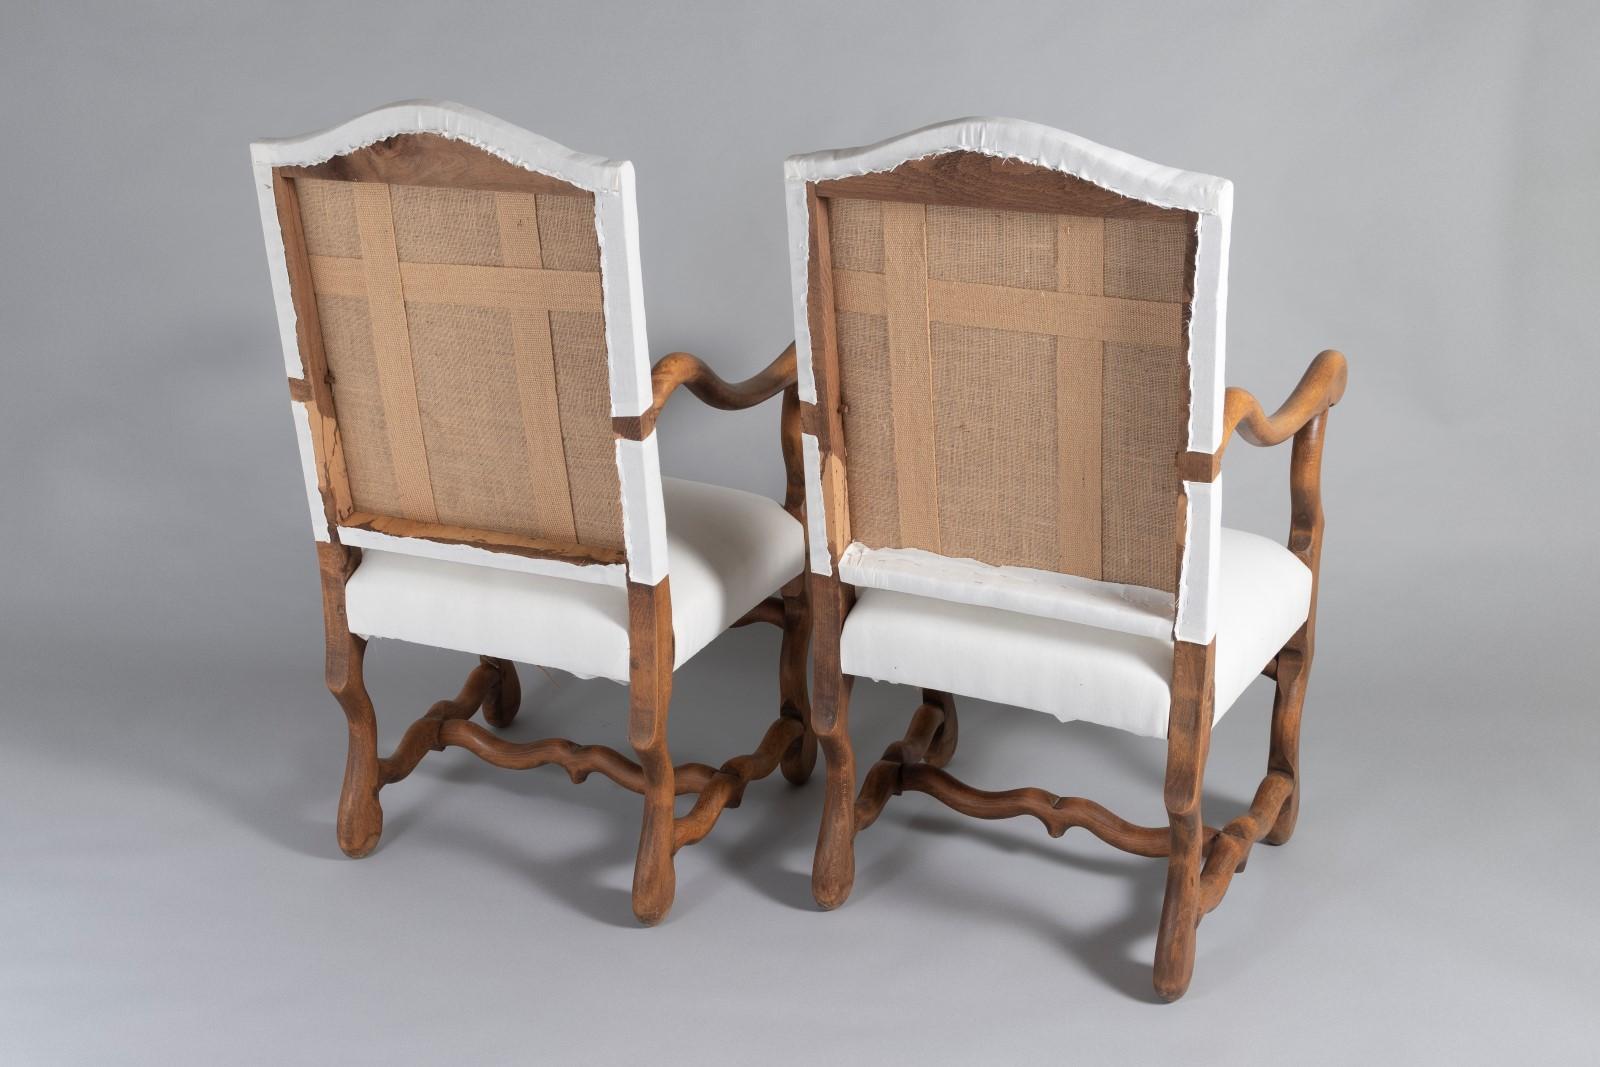 Hand-Crafted A Pair of French Os de Mouton (sheep Bone) Oak Armchairs – 19th Century